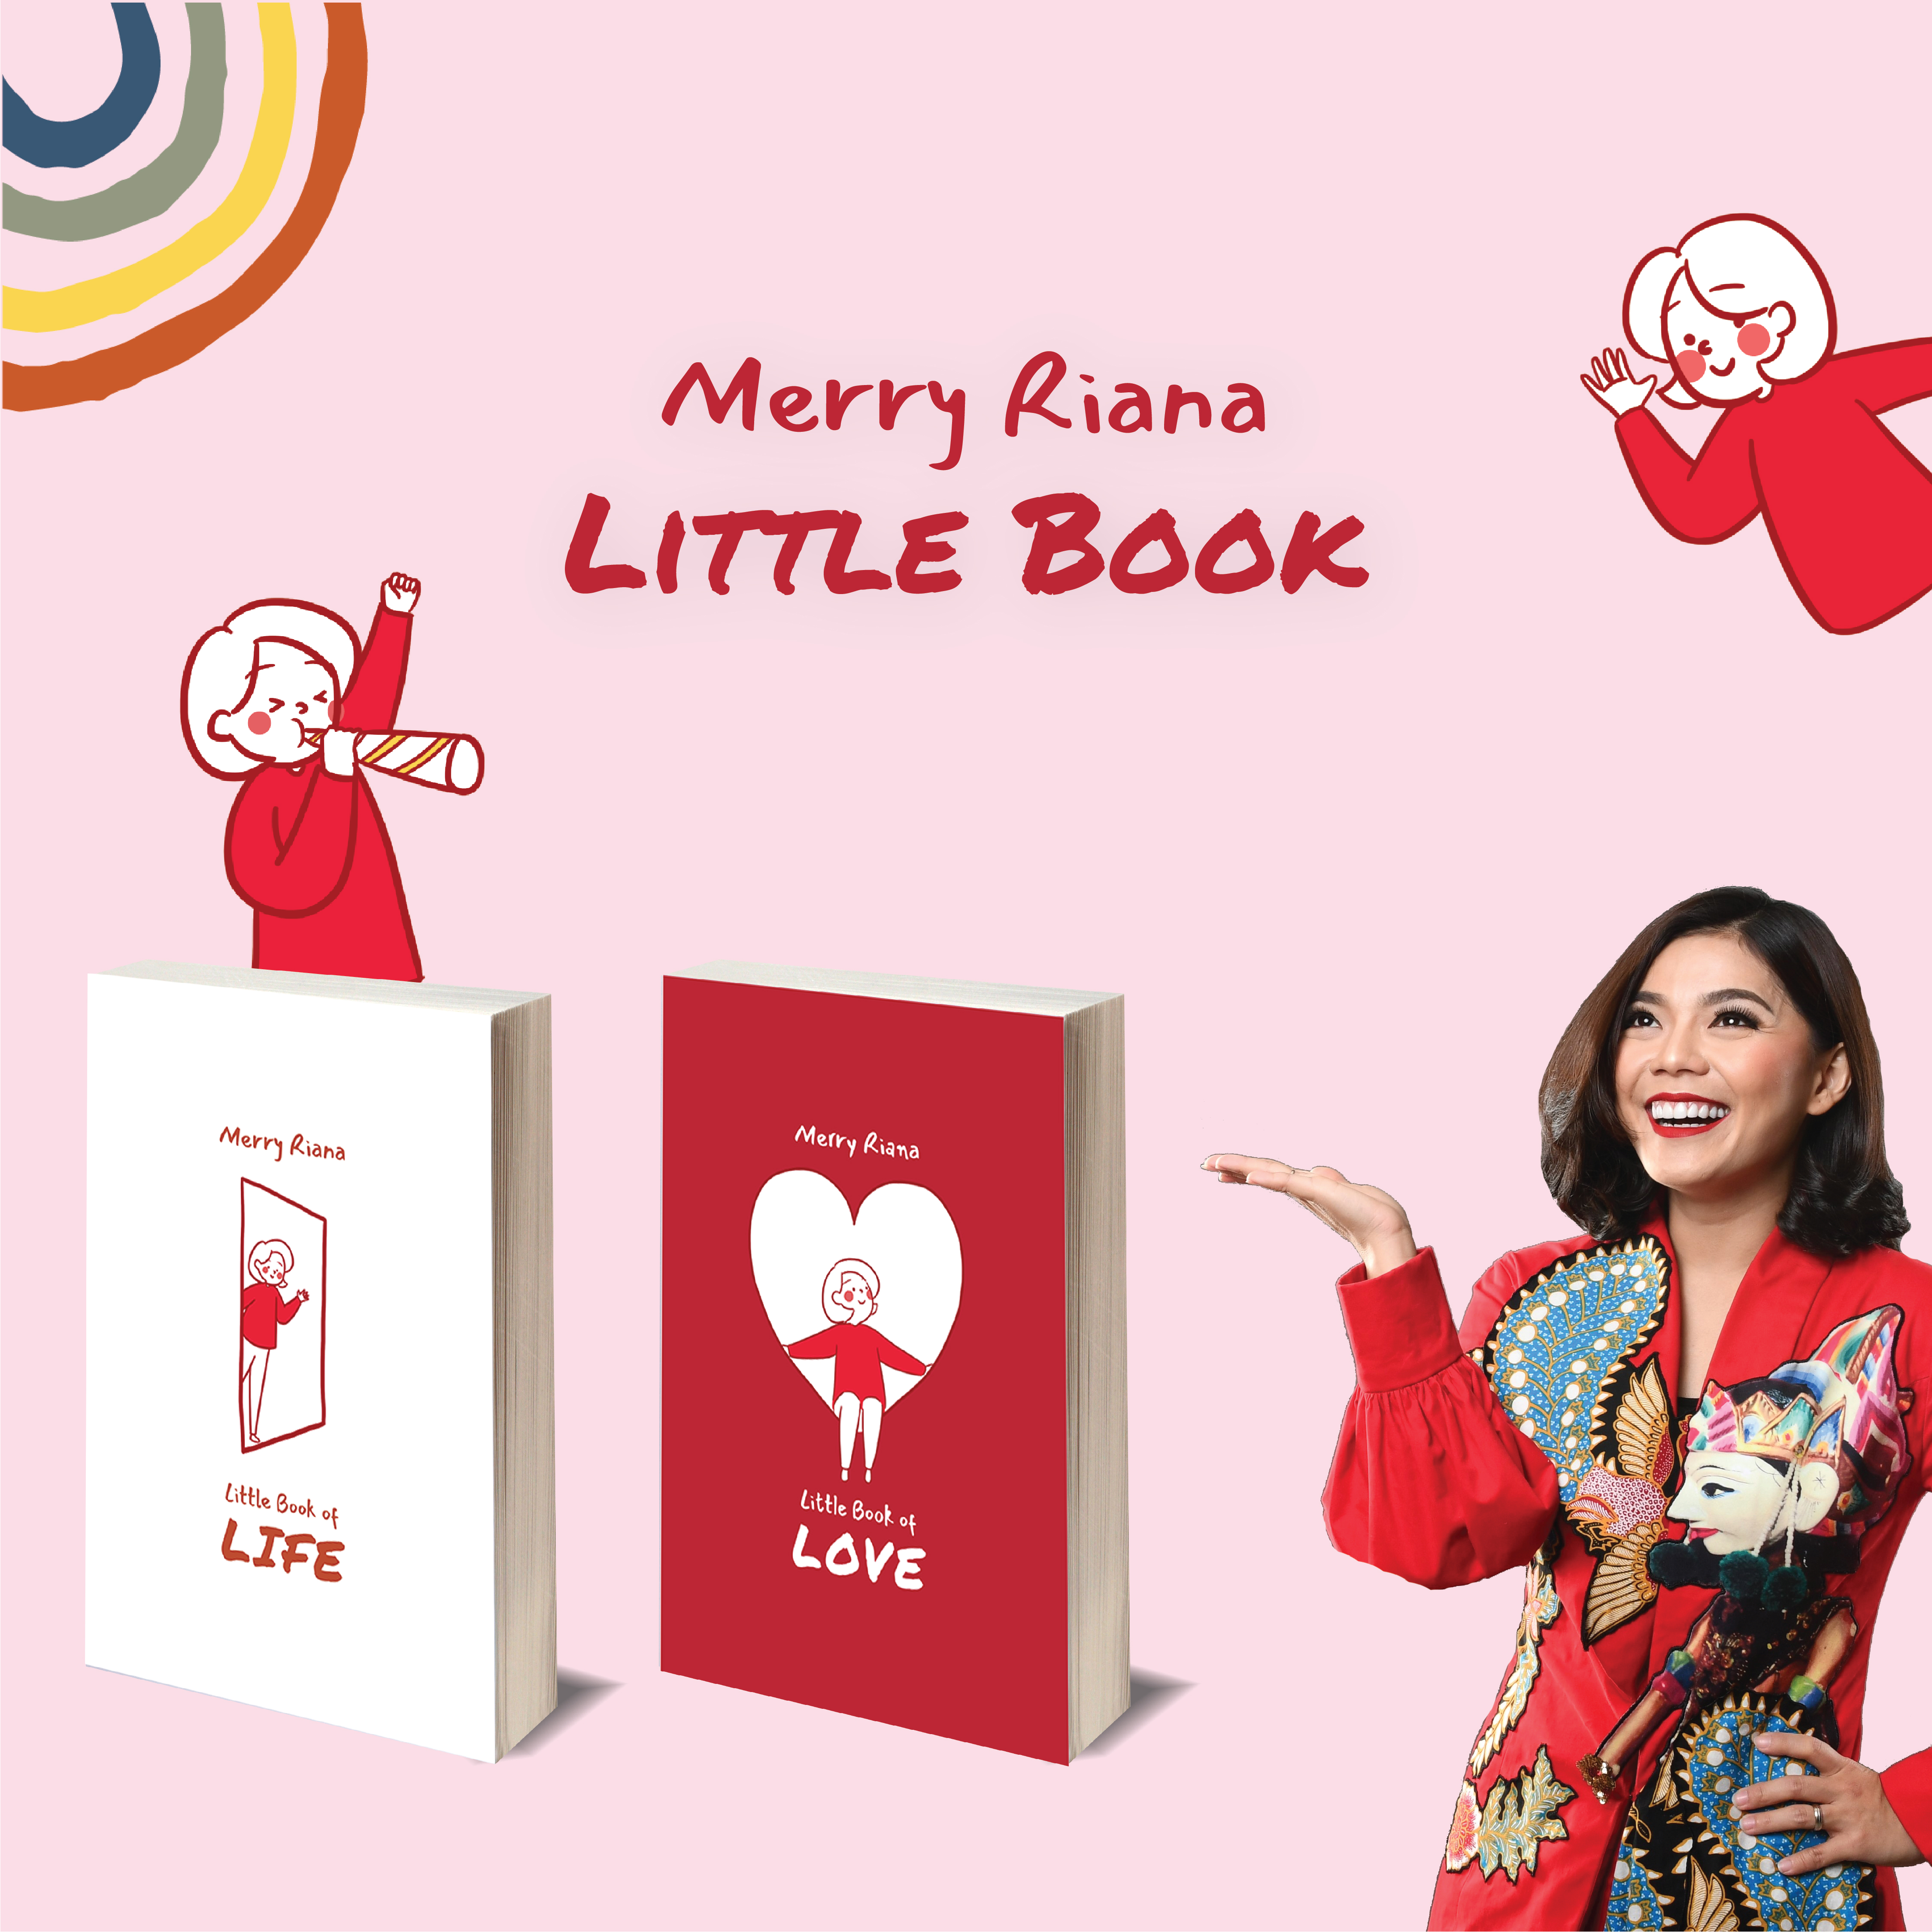 Merry Riana Little Book The Series